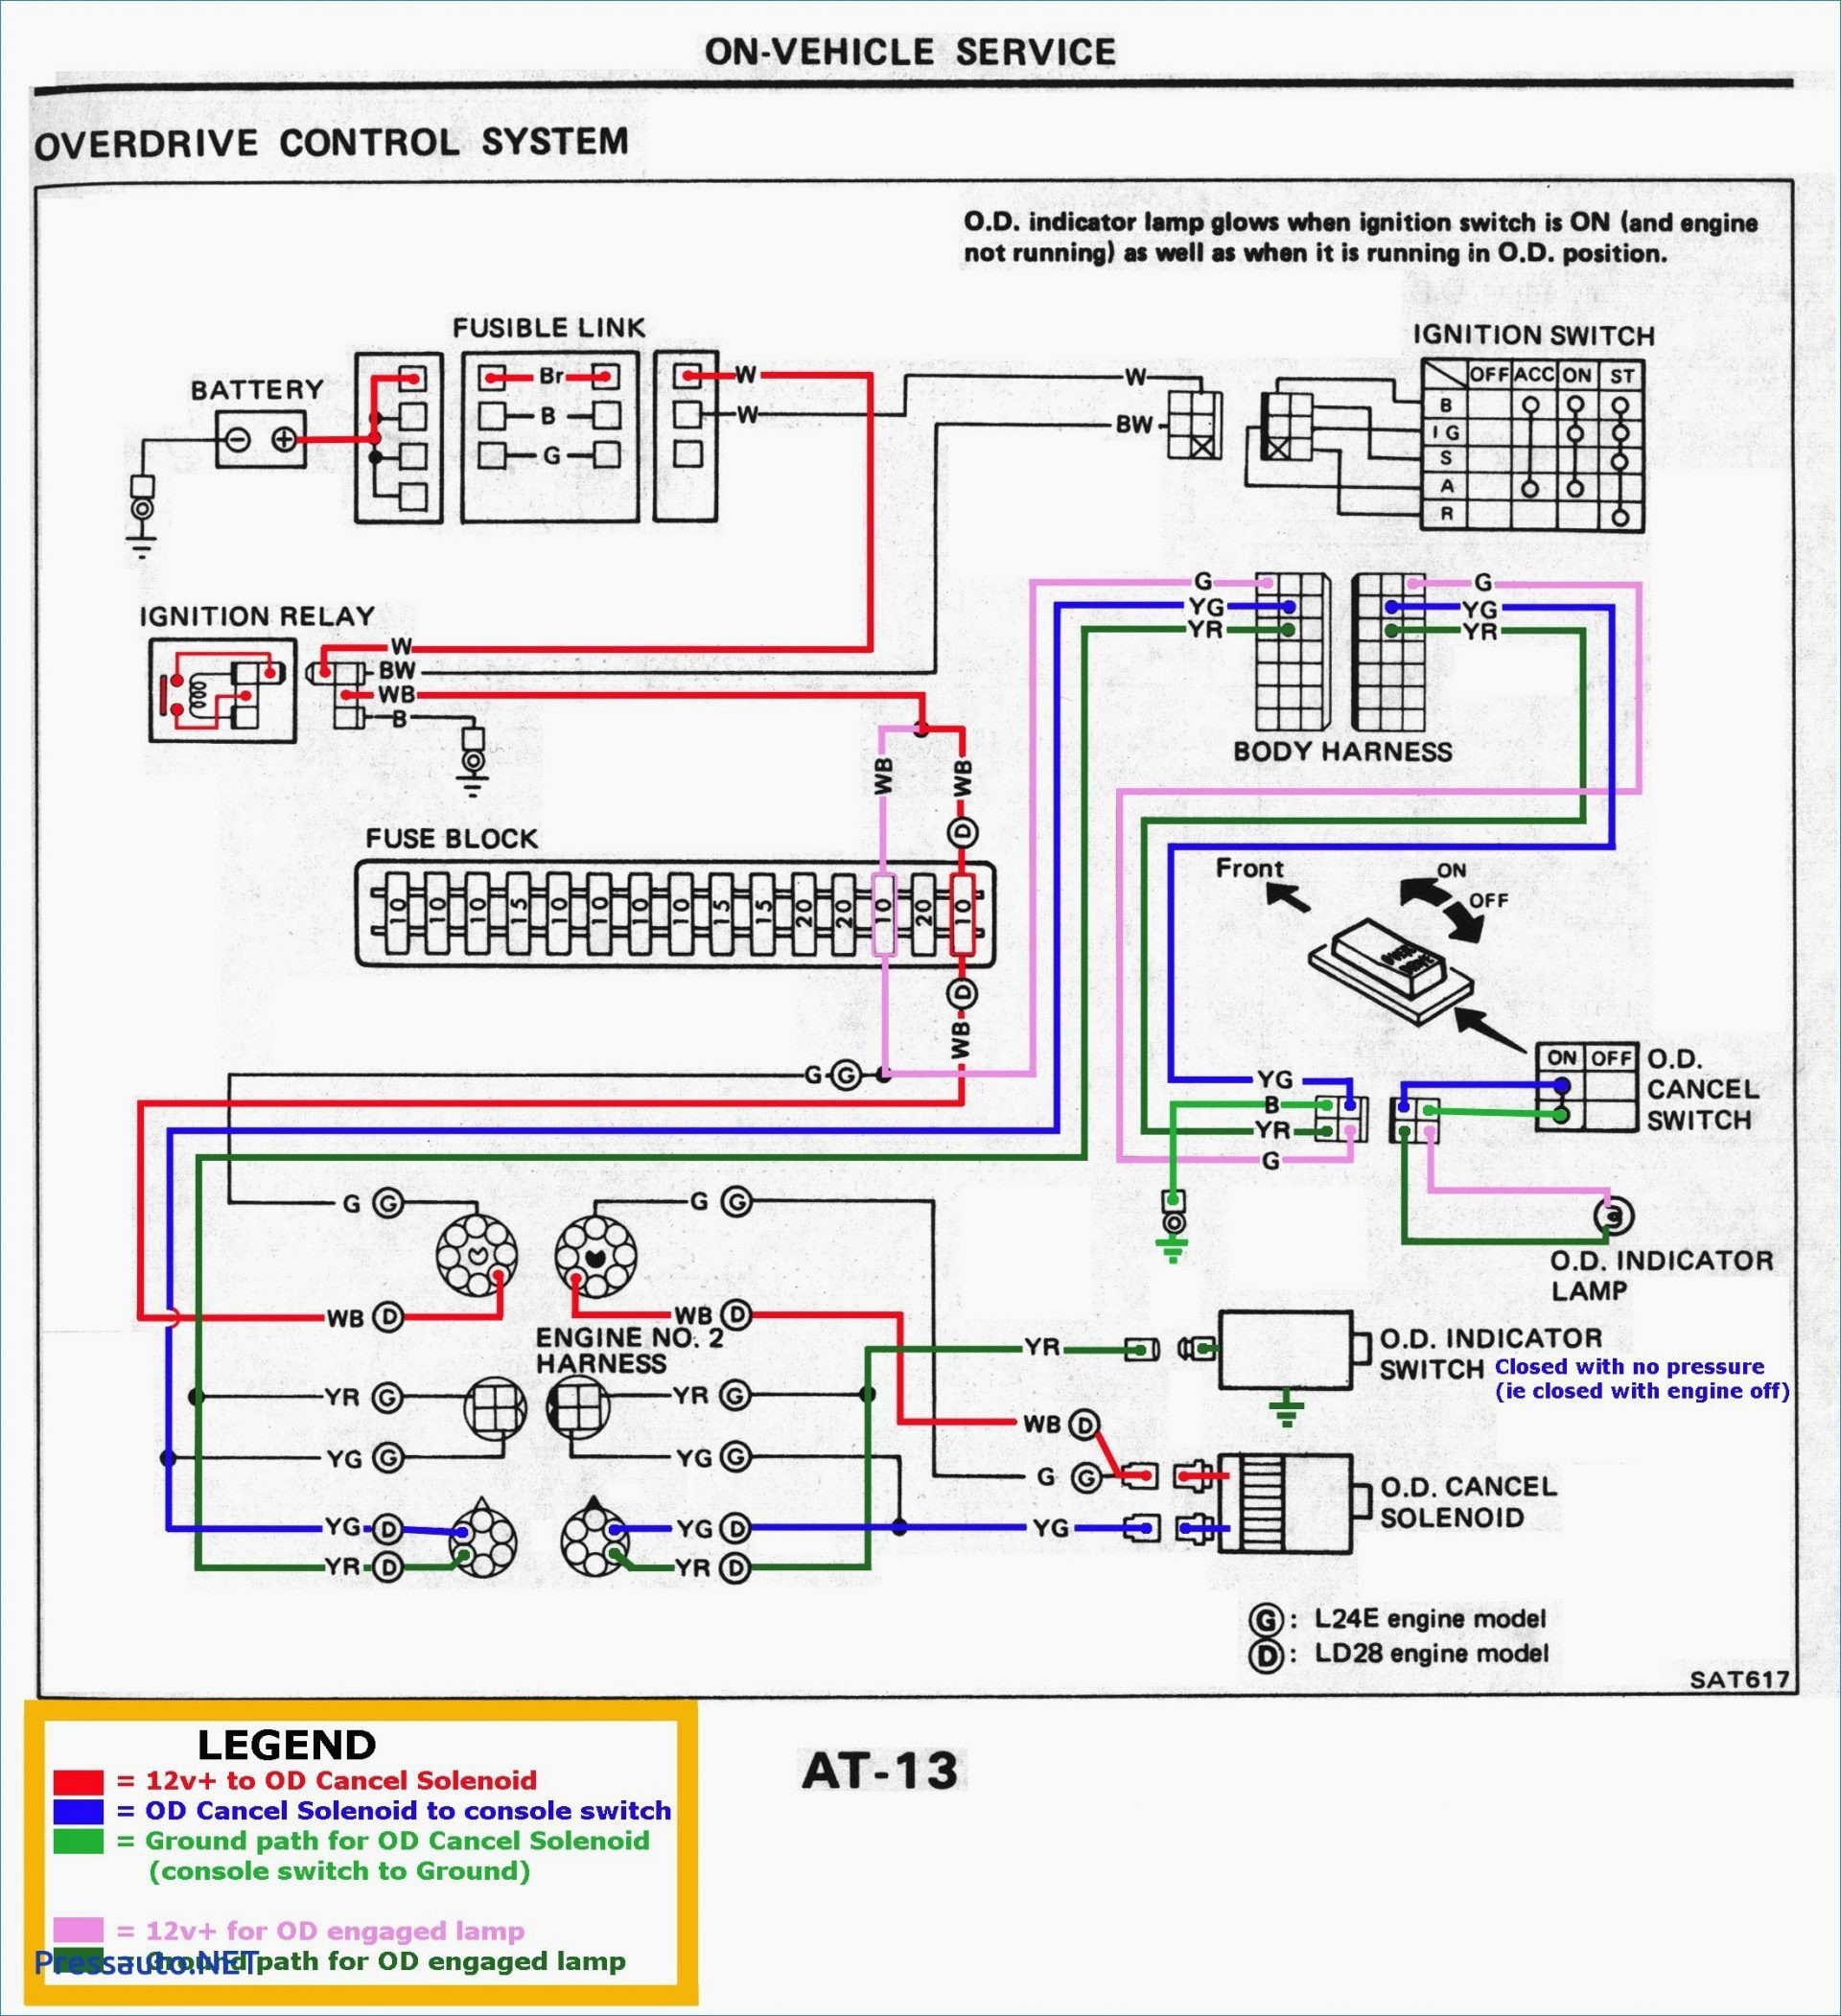 Toyota Engine Parts Diagram Great Description About Hixson toyota with Interesting Gallery Of Toyota Engine Parts Diagram